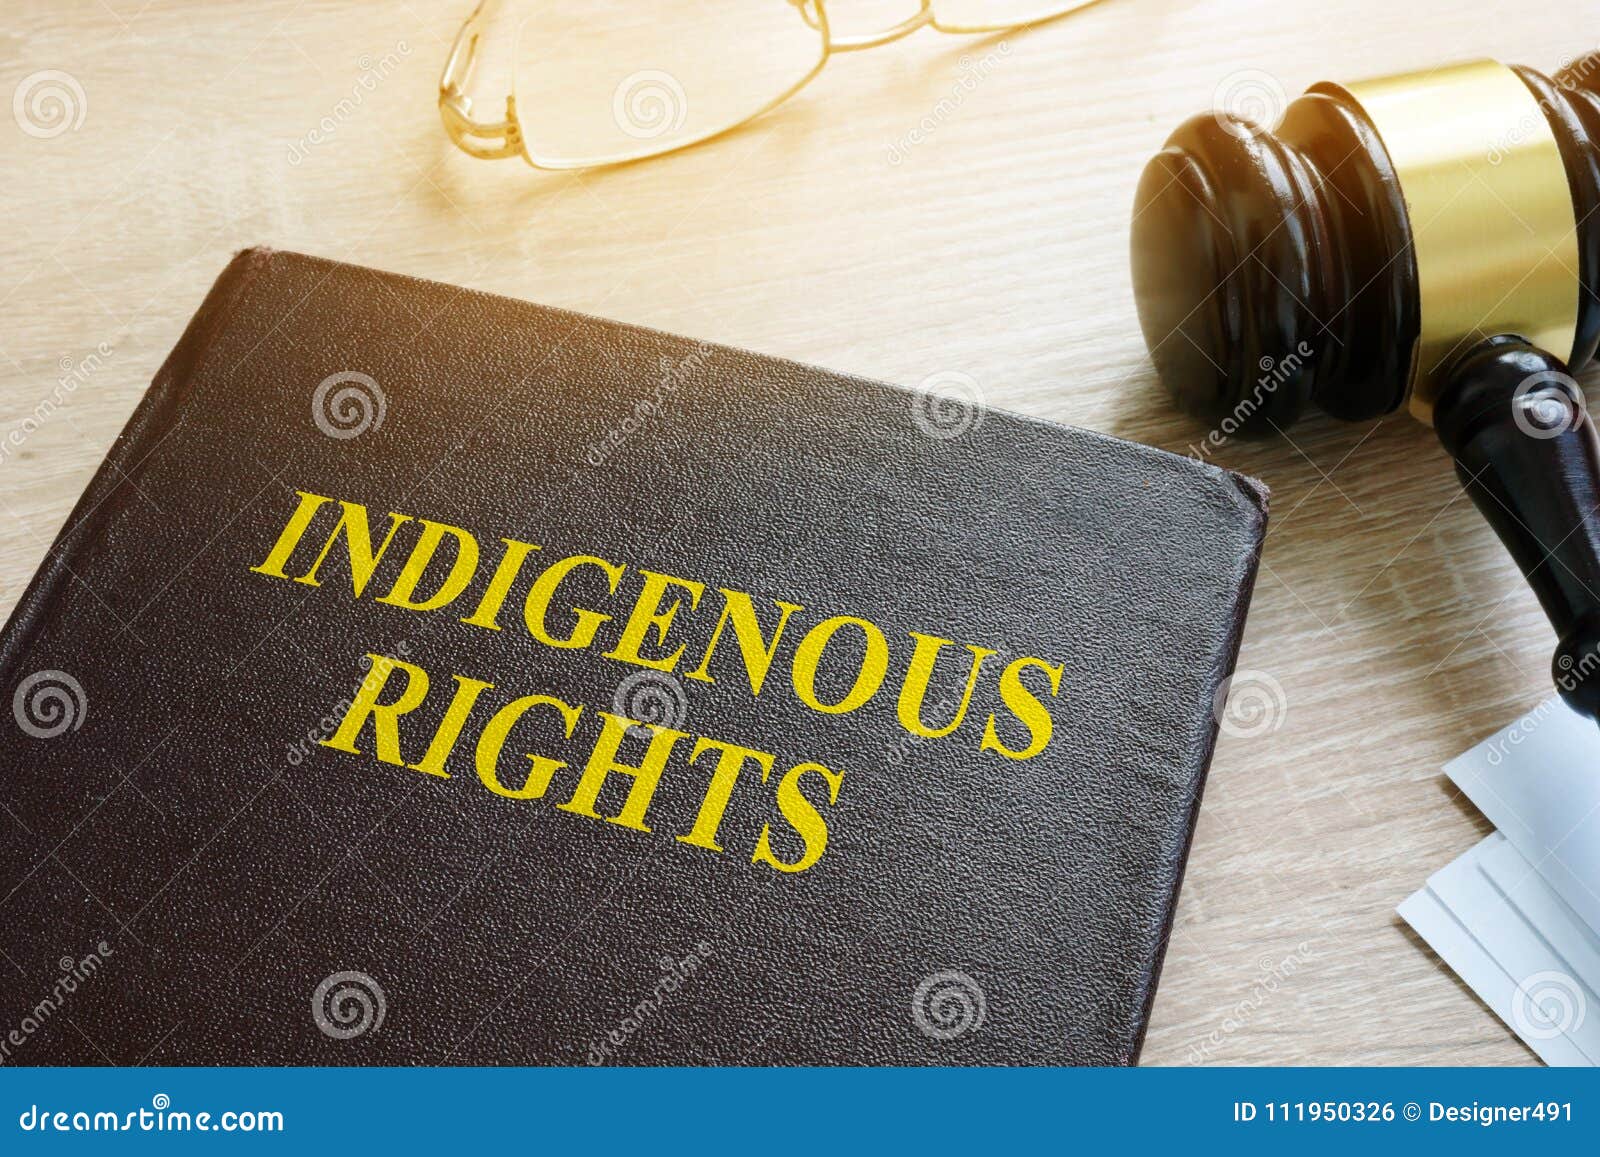 book about indigenous rights law.